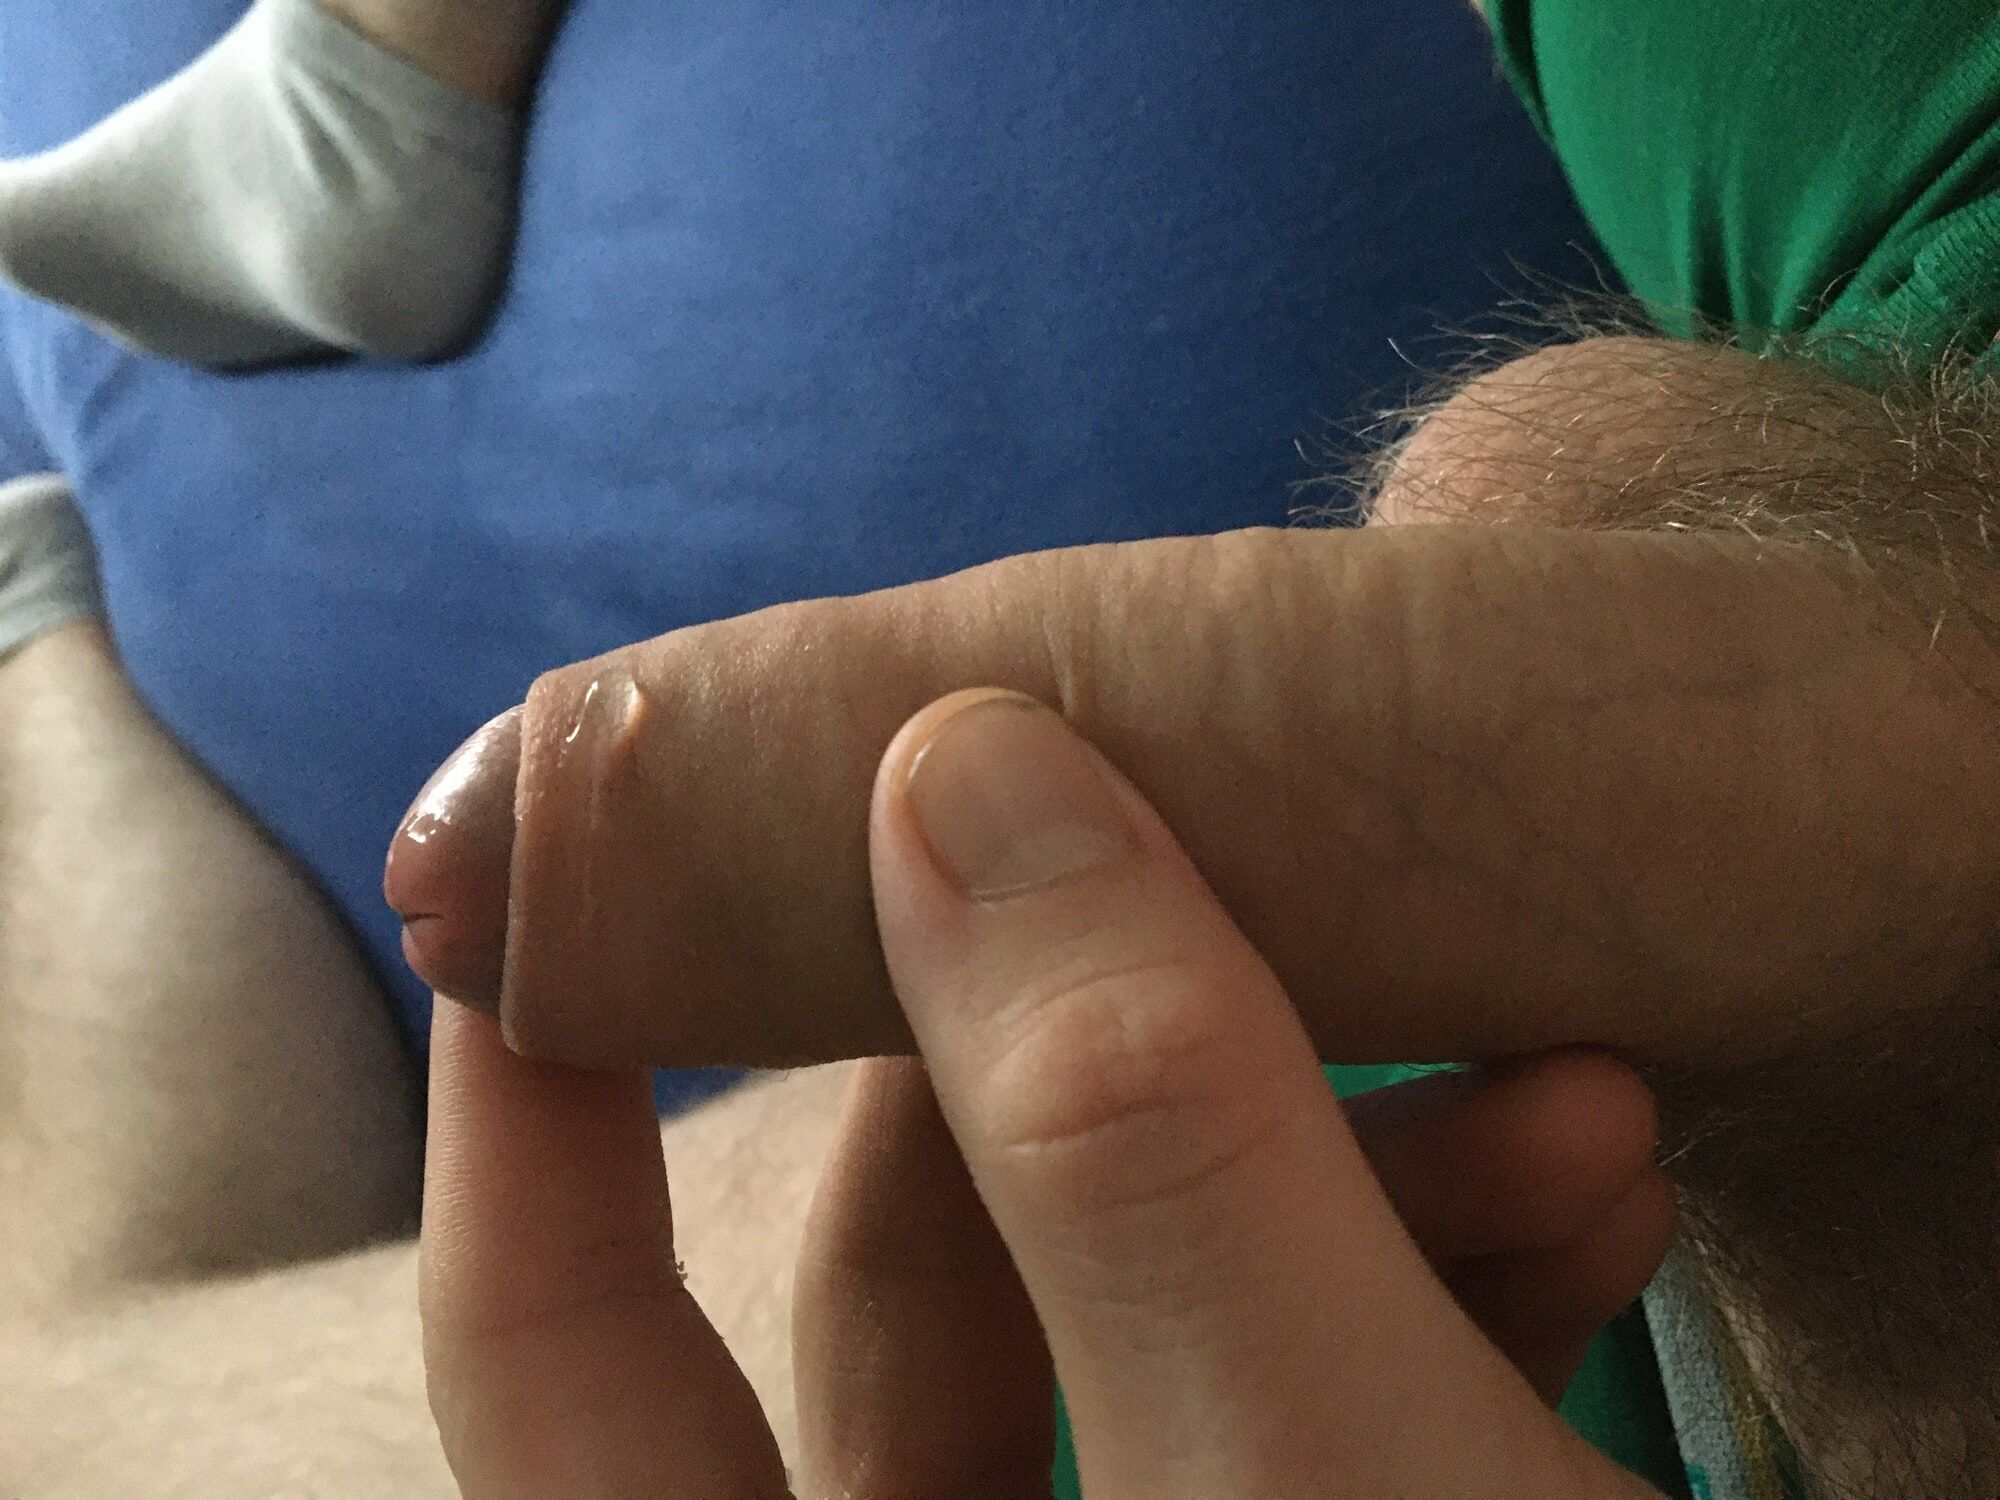 Hairy Dick And Balls Cockhead Foreskin Play With Pre- Cum #17